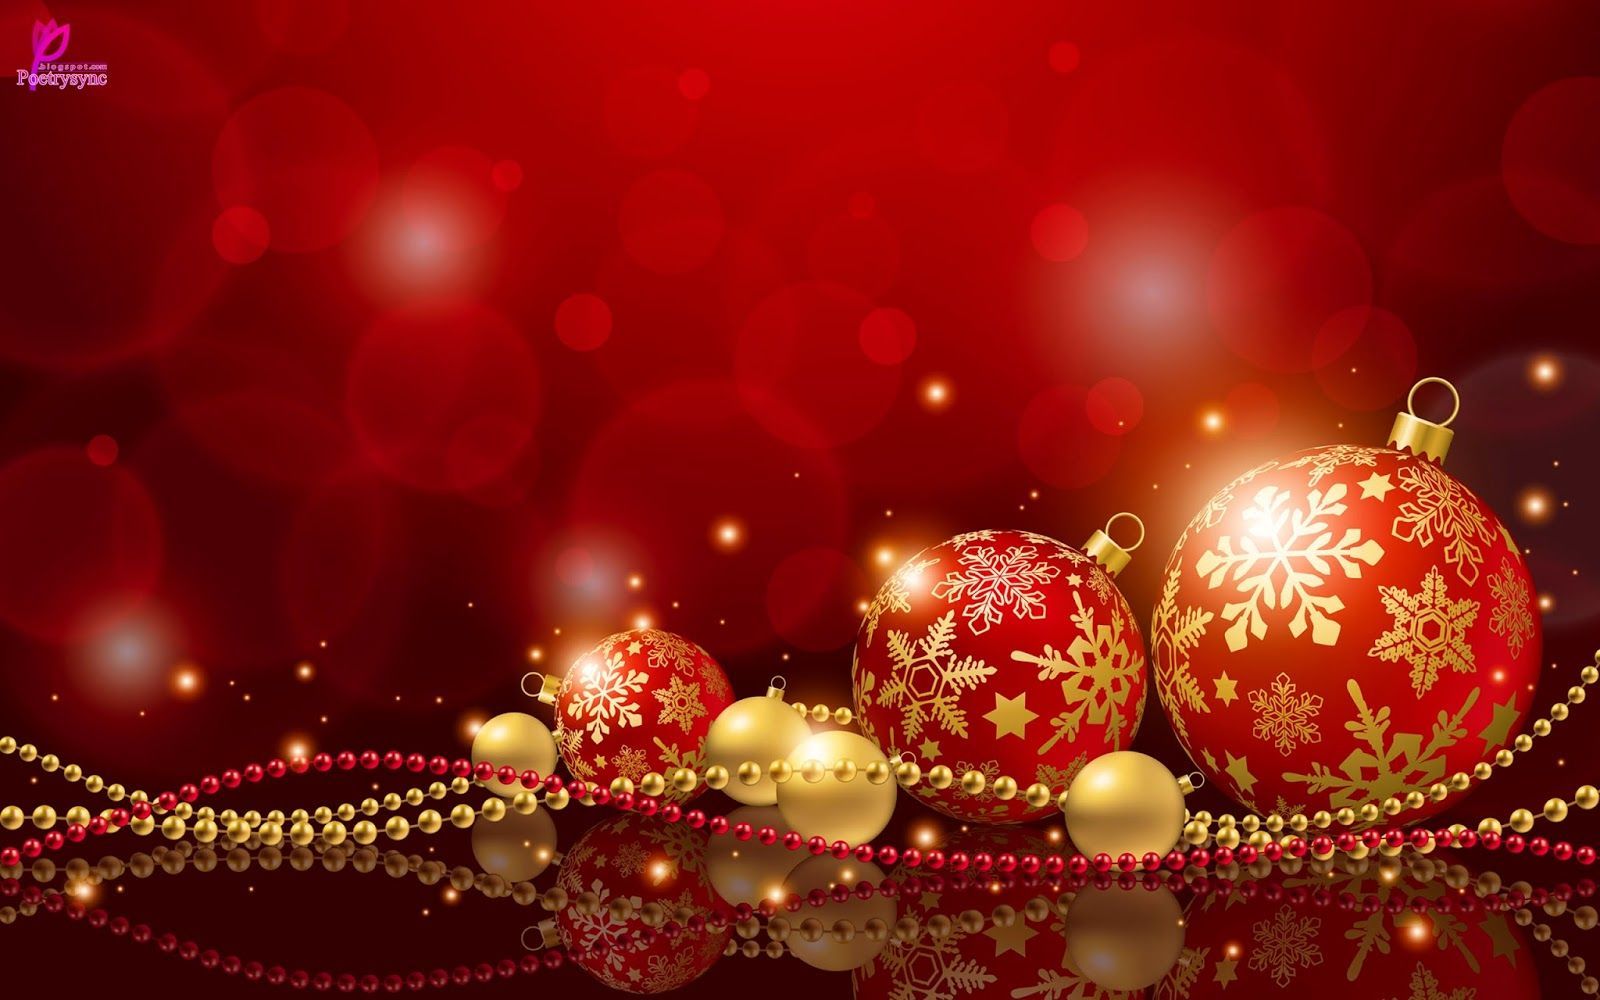 happy new year: Beautiful Happy Christmas HD Wallpaper. Christmas image, Red christmas background, Christmas card background